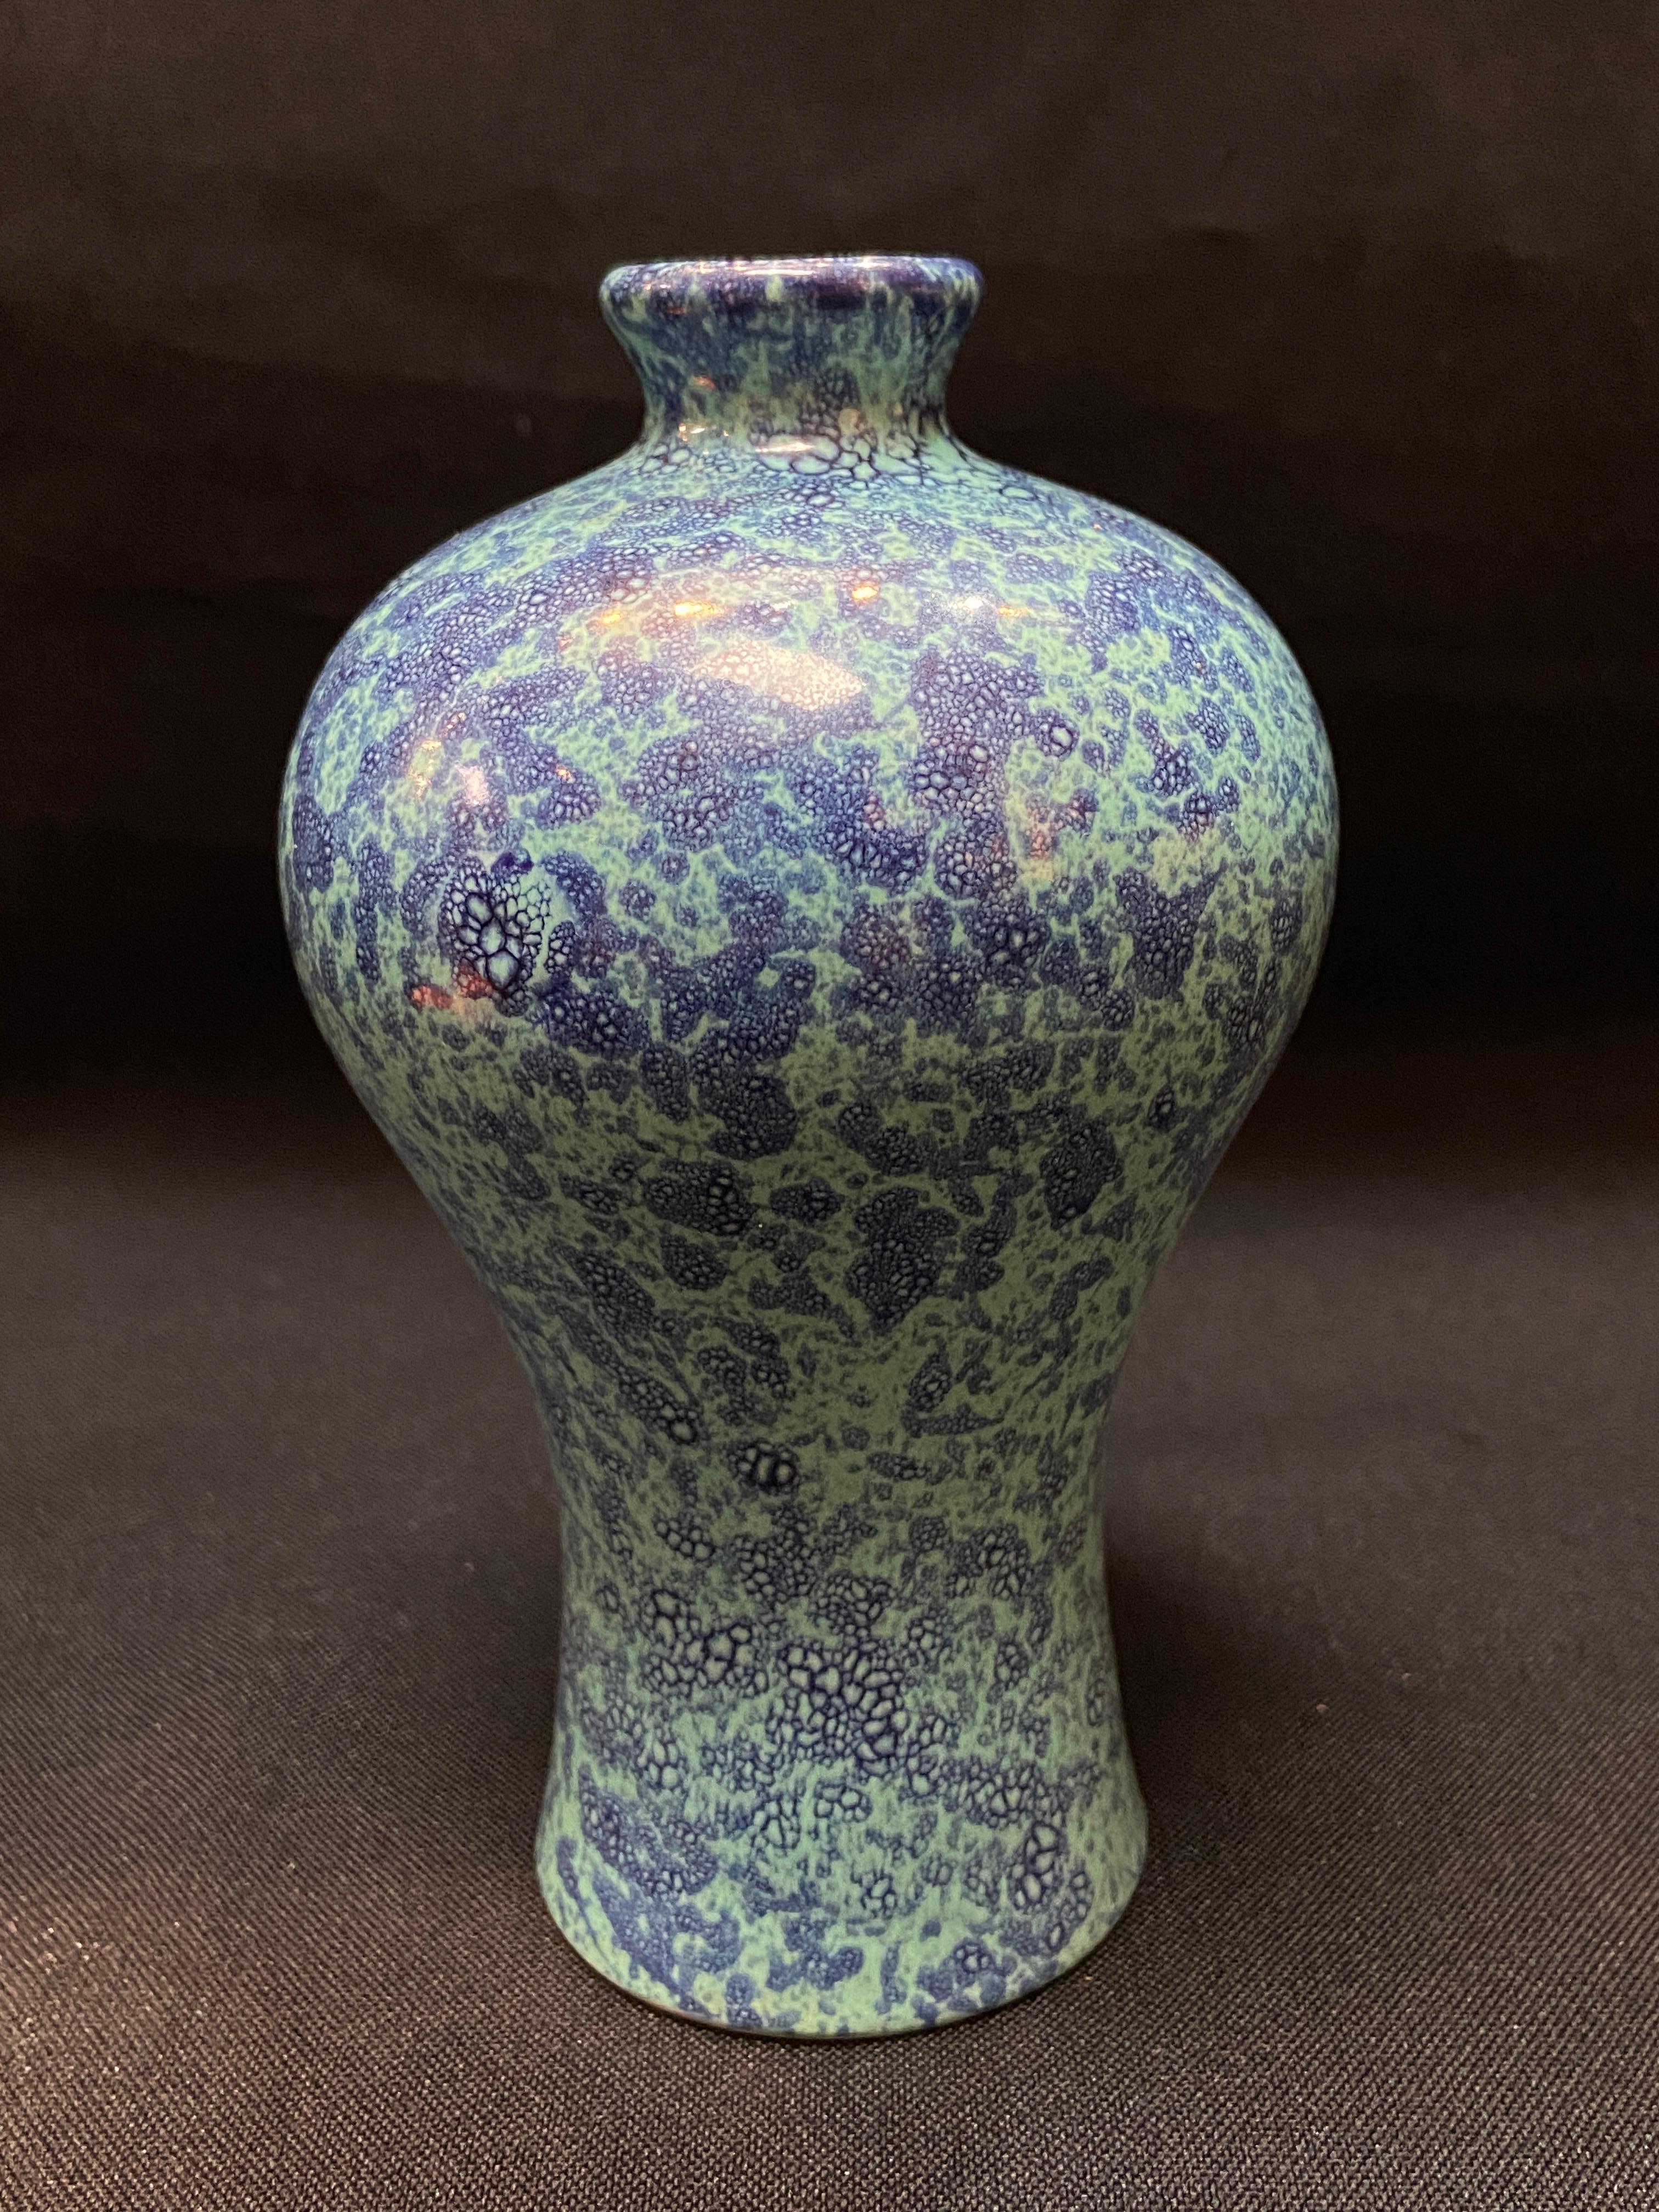 Qing， Chinese antique a delicate “Robin-Egg”-glazed porcelain plum vase/ 清，炉钧釉梅瓶 （全品）18th century
Condition：Shows normal sign of wear and use，please look carefully before purchase. 
Approximate size：H：14 cm，W：7 cm. Please refer the size in the